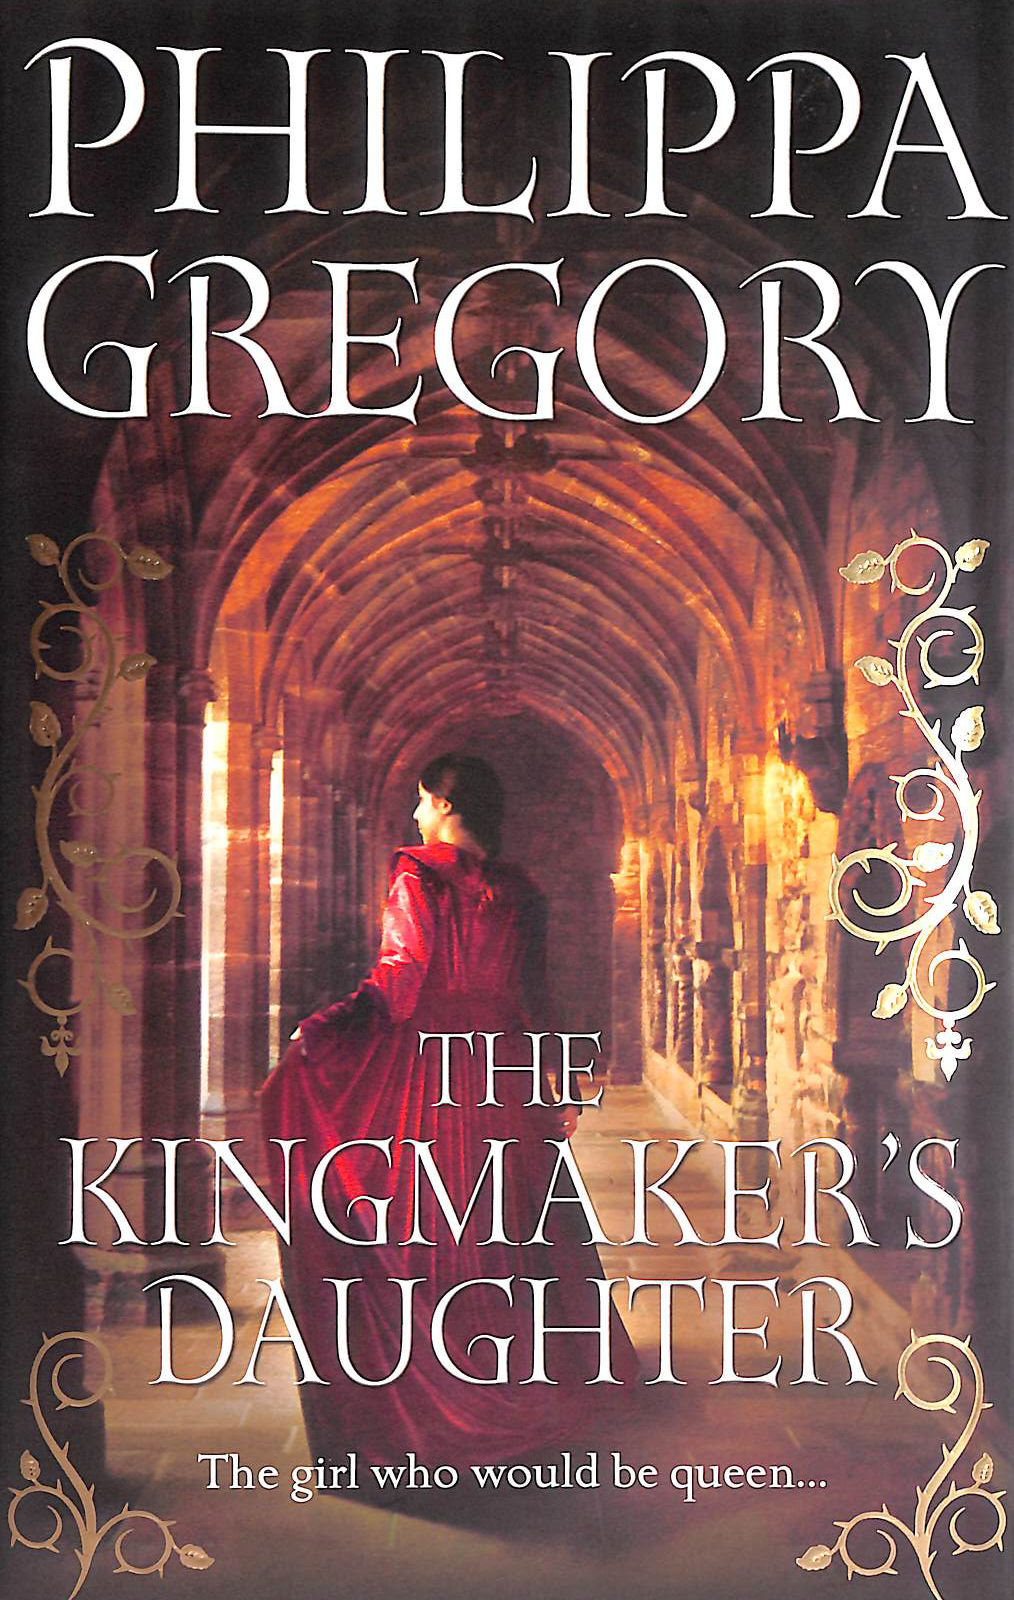 PHILIPPA GREGORY - The Kingmaker's Daughter (Cousins War 4)